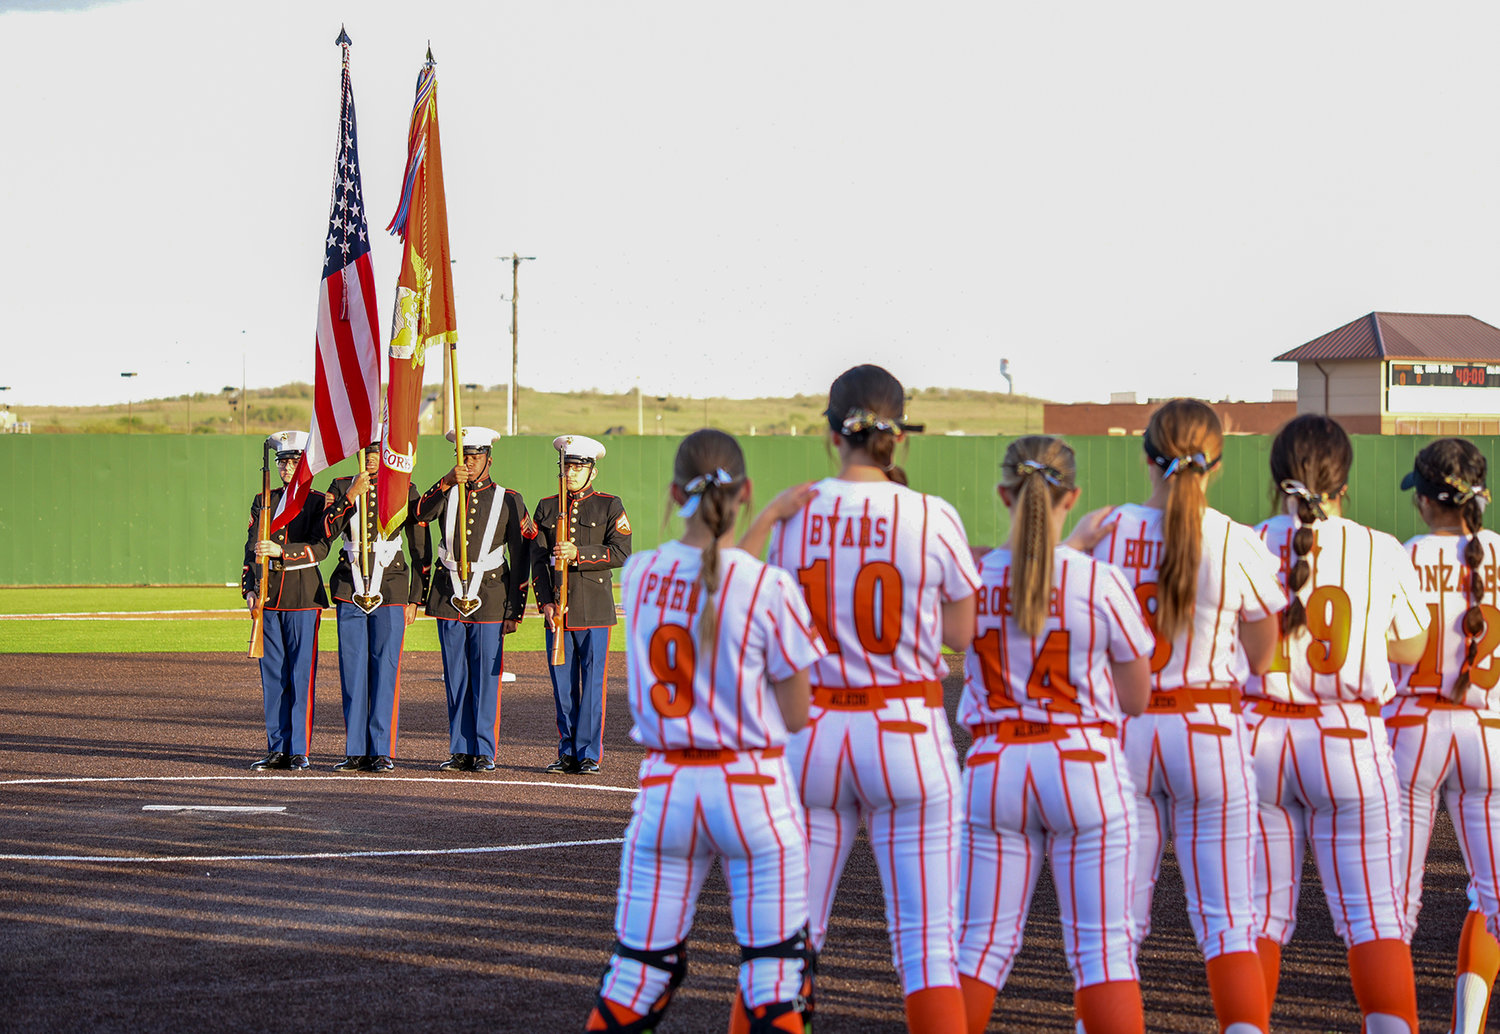 Ladycats pay tribute to our military and first responders before the game against Granbury Pirates.